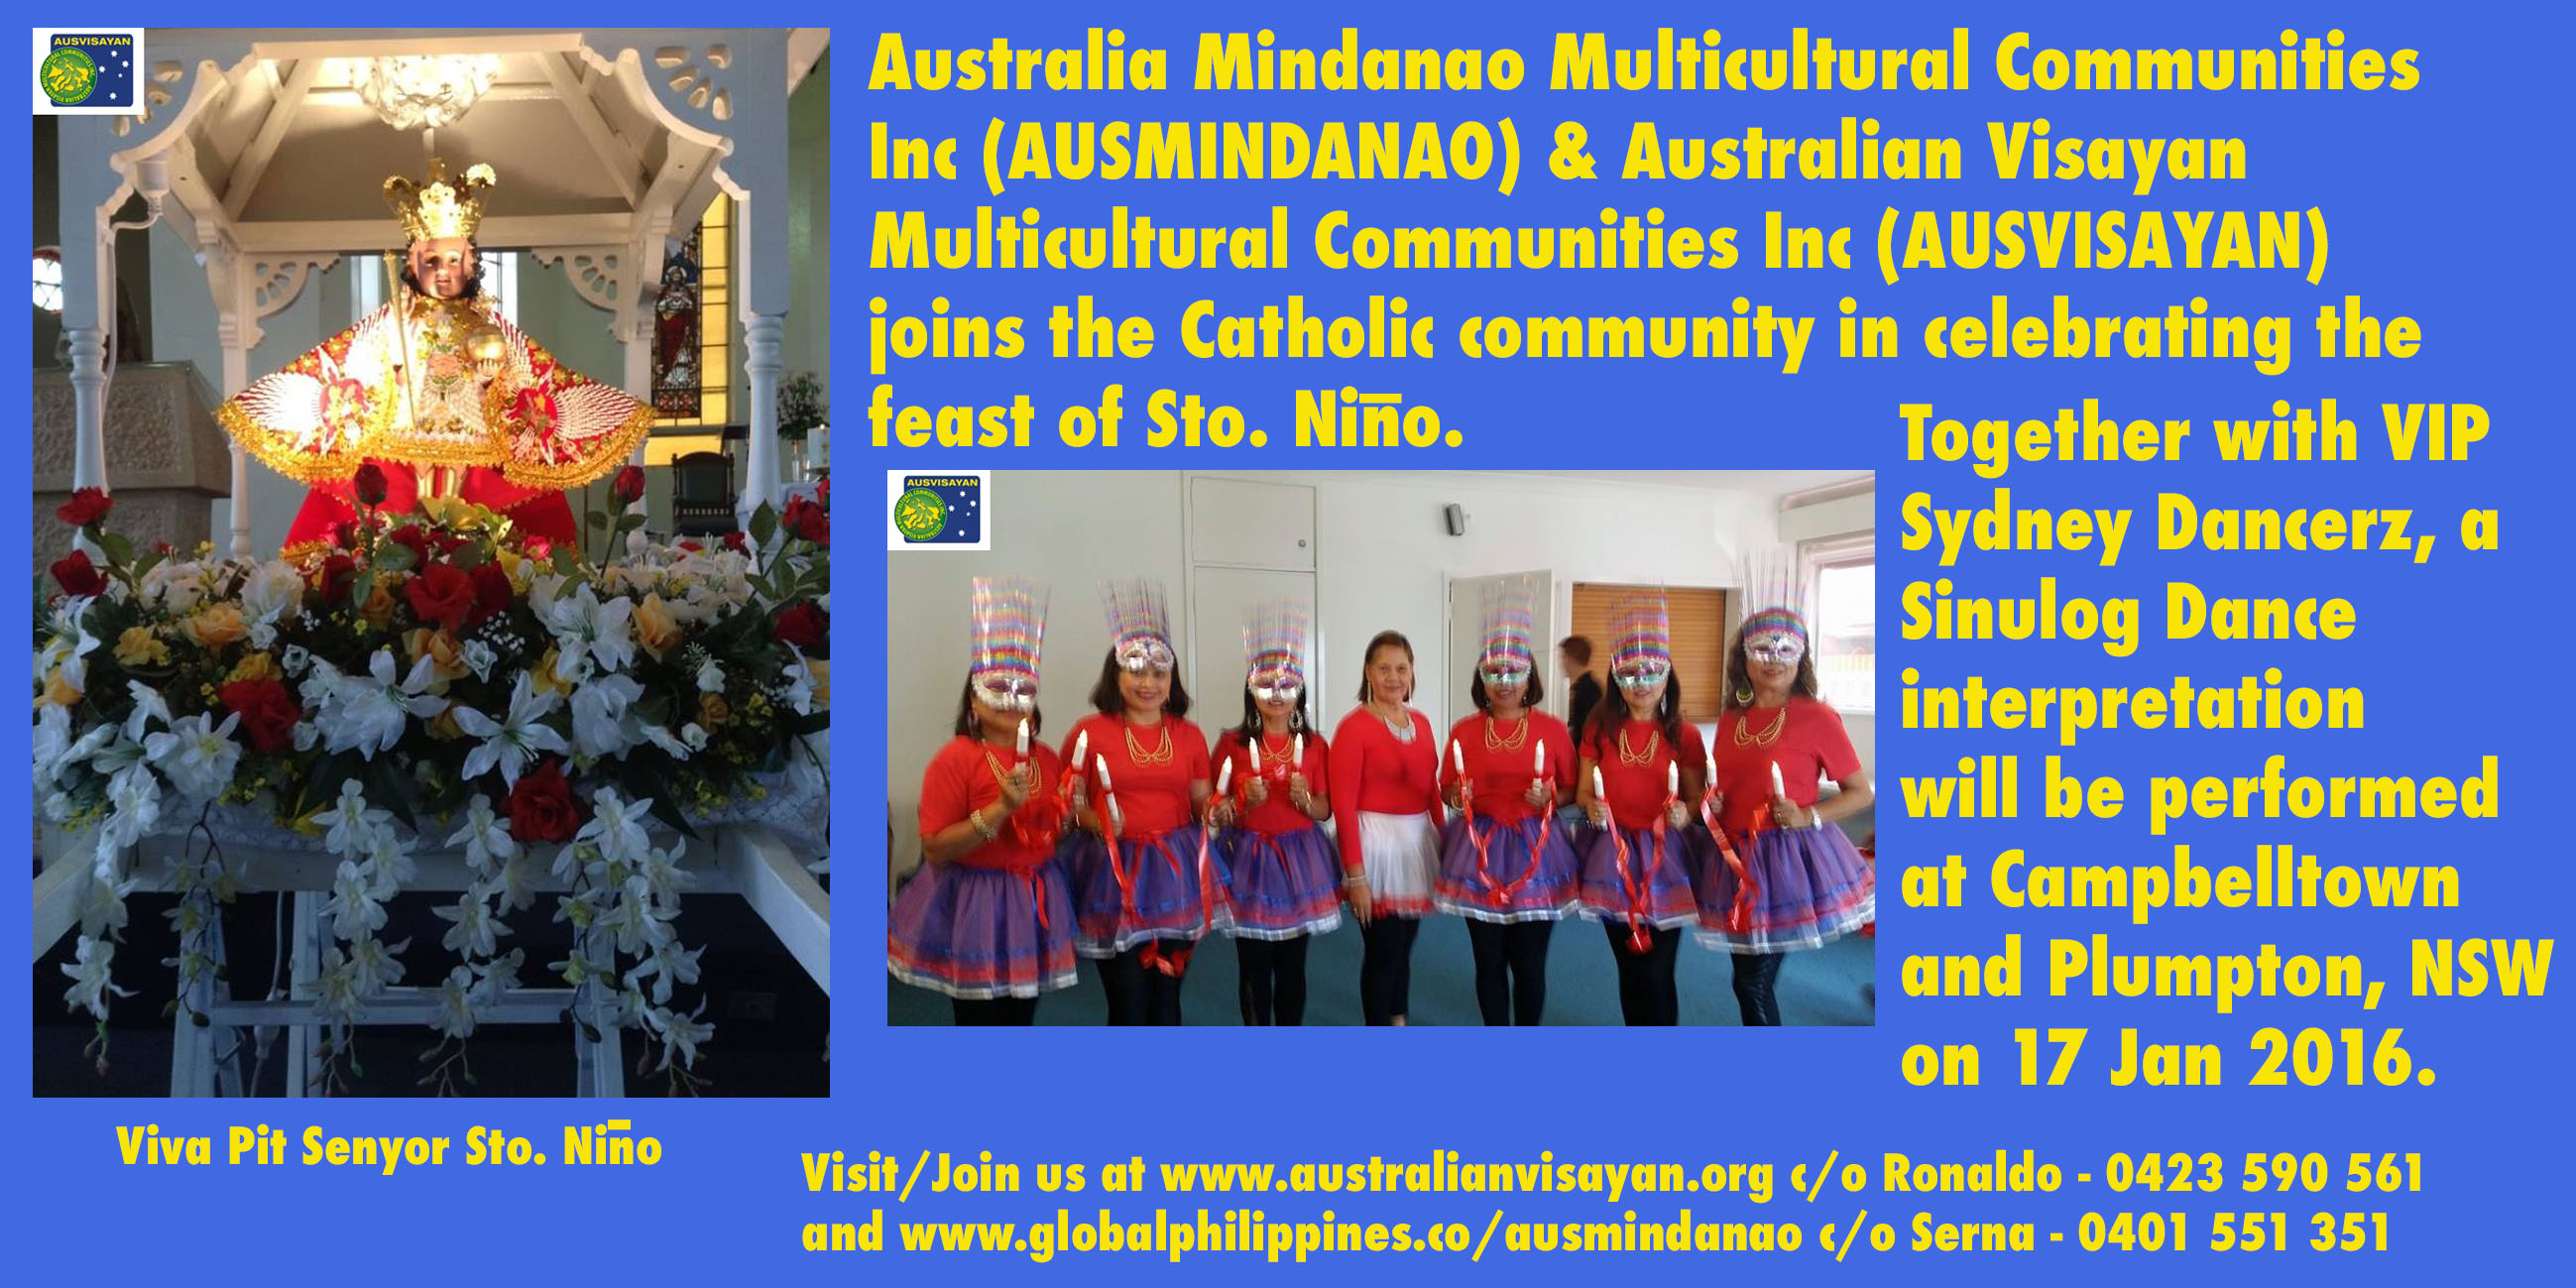 Members of AUSMINDANAO and AUSVISAYAN Multicultural Communities to perform in 2016 Sinulog Festival in Australia on 17 January 2016